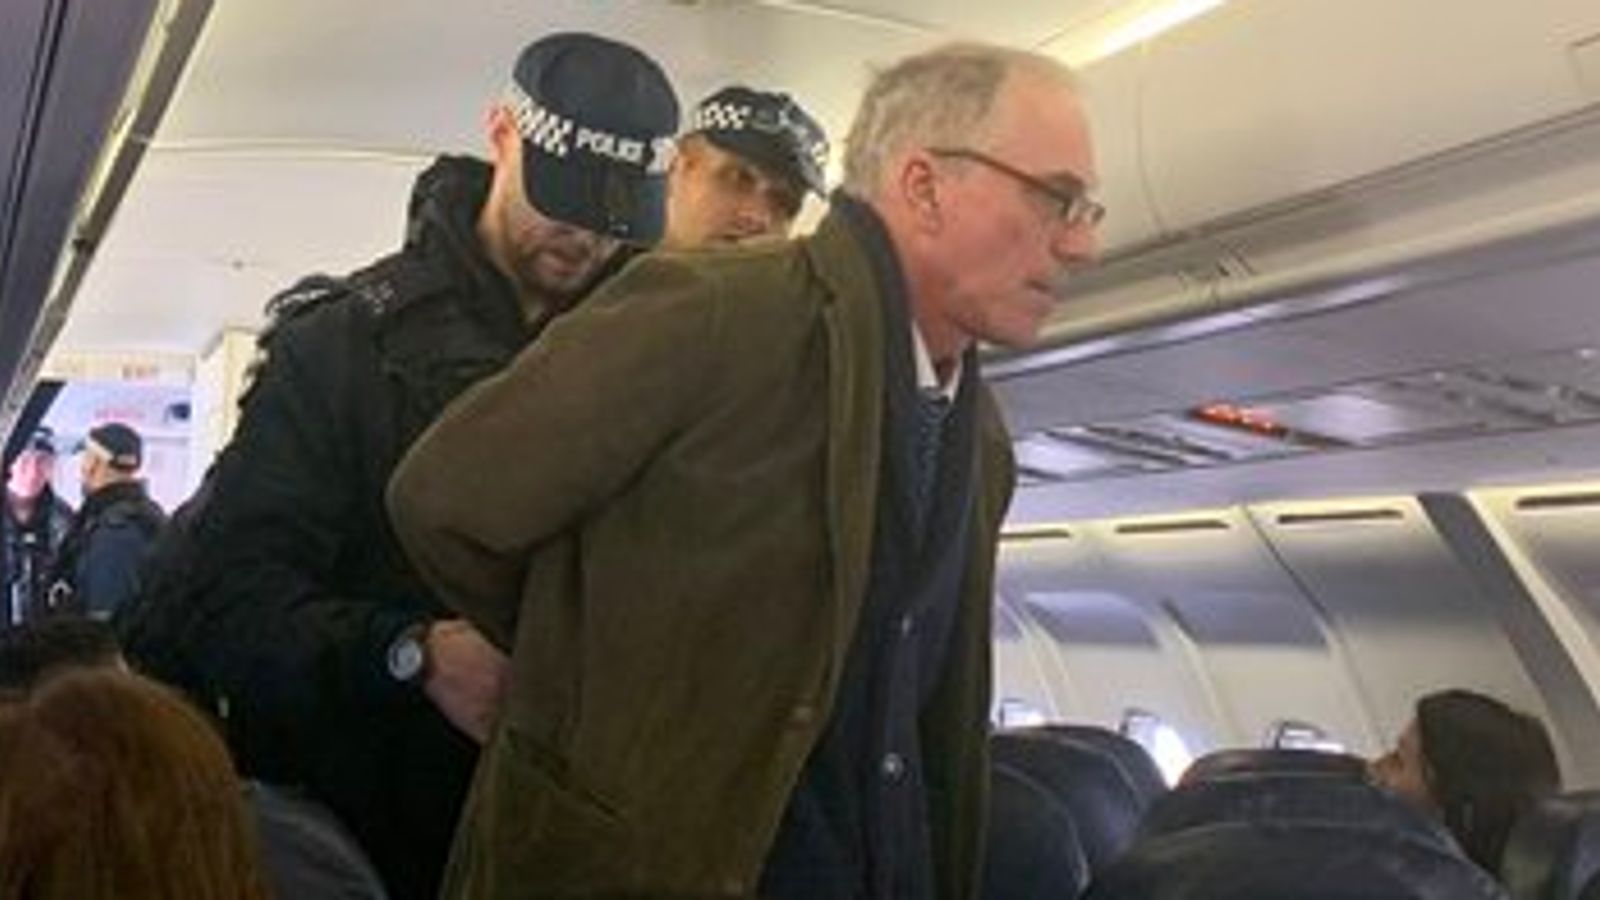 Flight returns to London City Airport terminal as climate change protester is arrested on board - Sky News